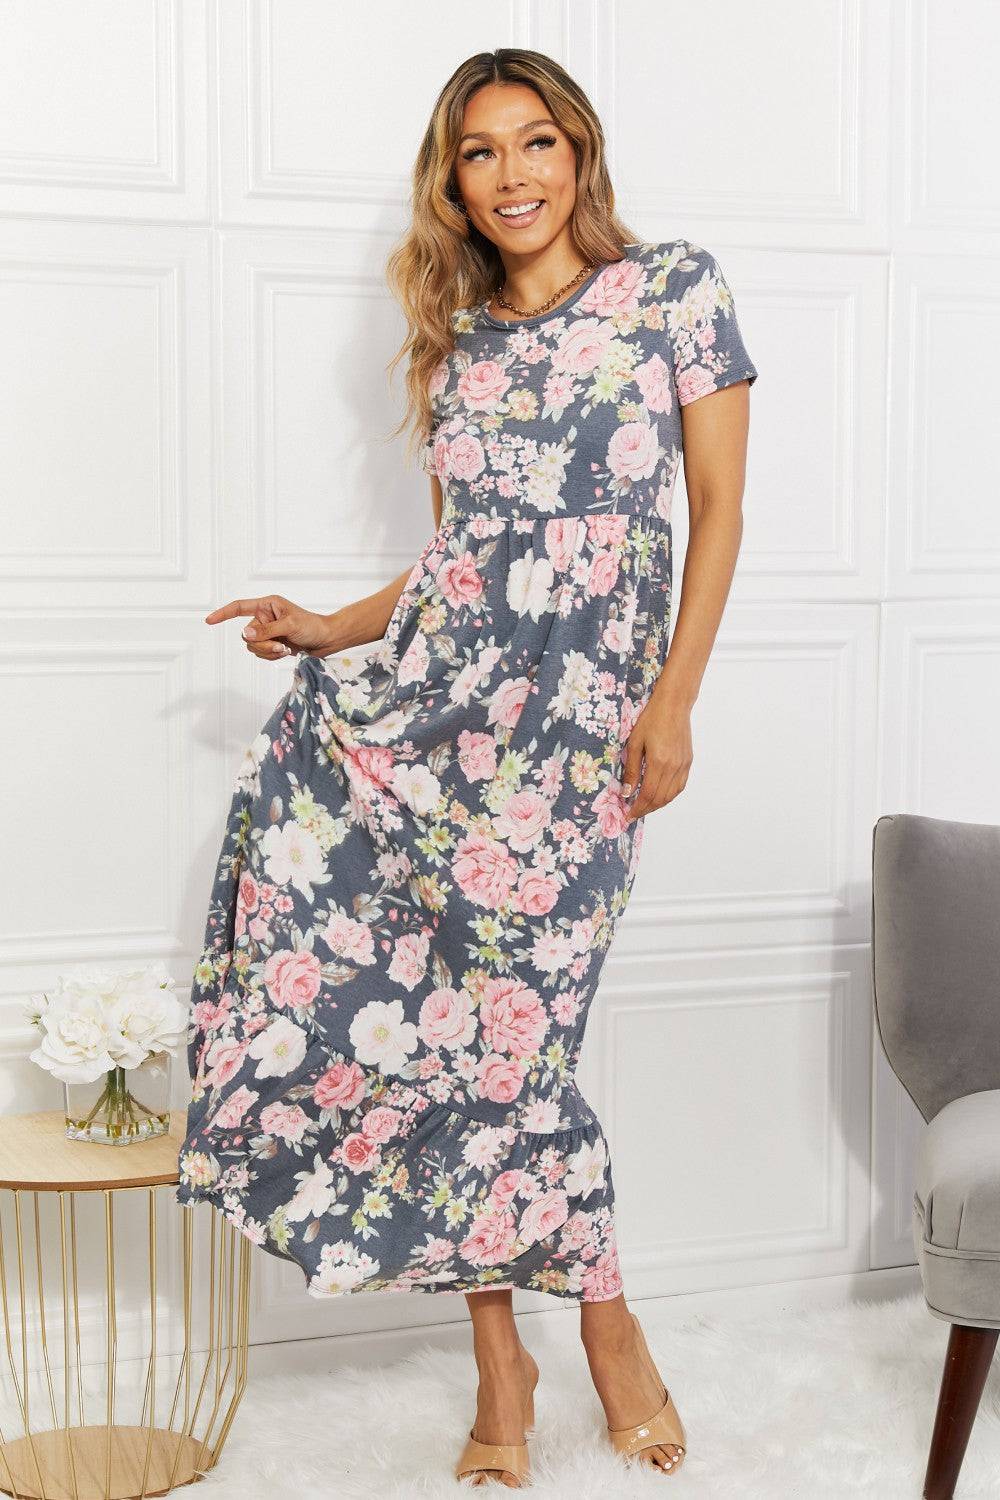 In Bloom Floral Tiered Maxi Dress - Awaken your Inner Romantic and Blossom in Unsurpassed Splendor - Indulge in the Captivating Charm of Love. - Guy Christopher